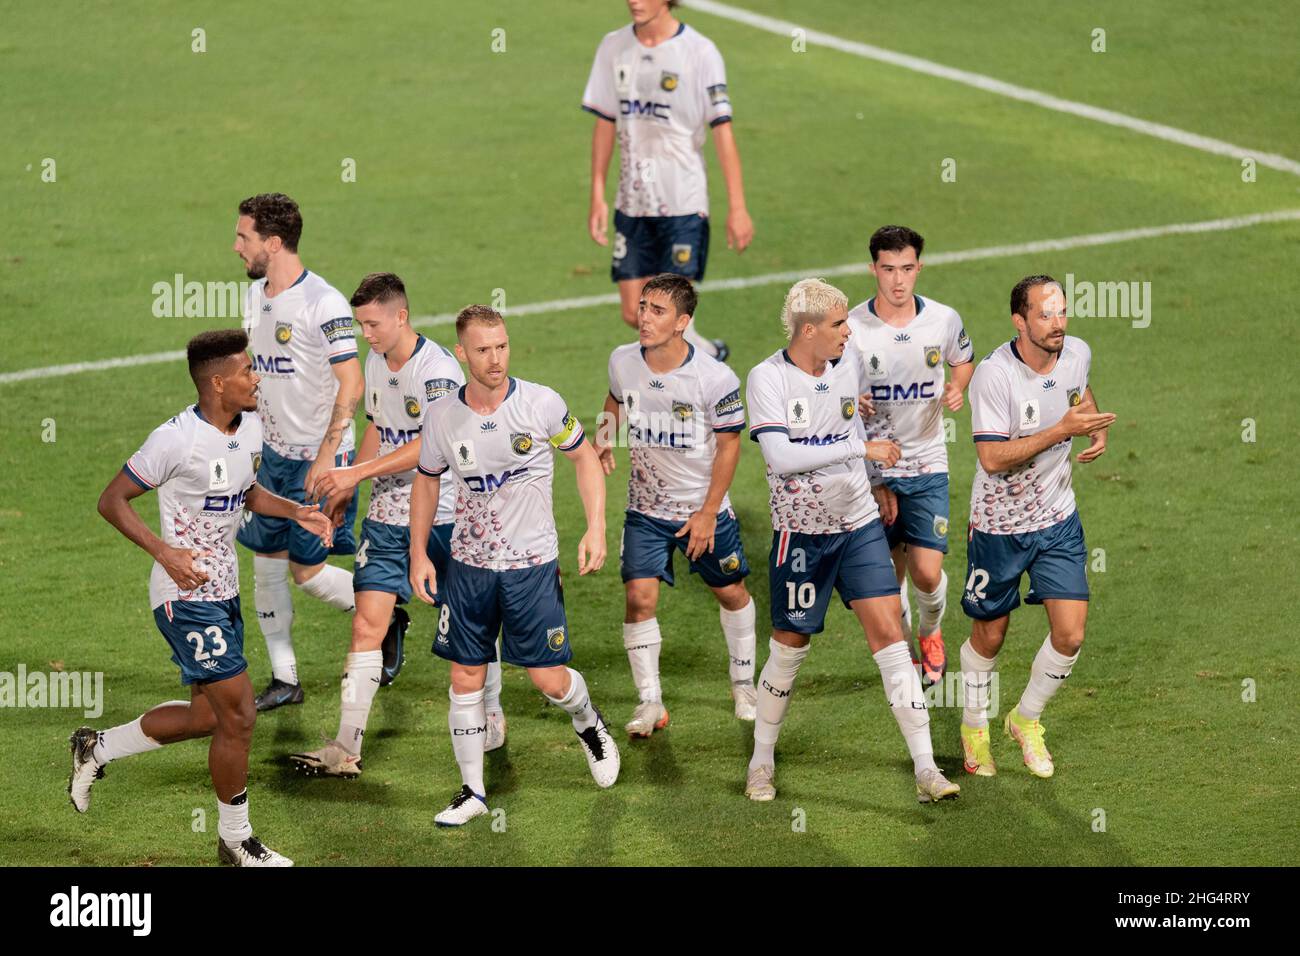 Marcos Urena (12) of the Mariners celebrates with team mates after scoring a goal during the FFA Cup 2021 Semi Final match between Sydney FC and Central Coast Mariners at Netstrata Jubilee Stadium on January 18, 2022, in Sydney, Australia. (Editorial use only) Stock Photo